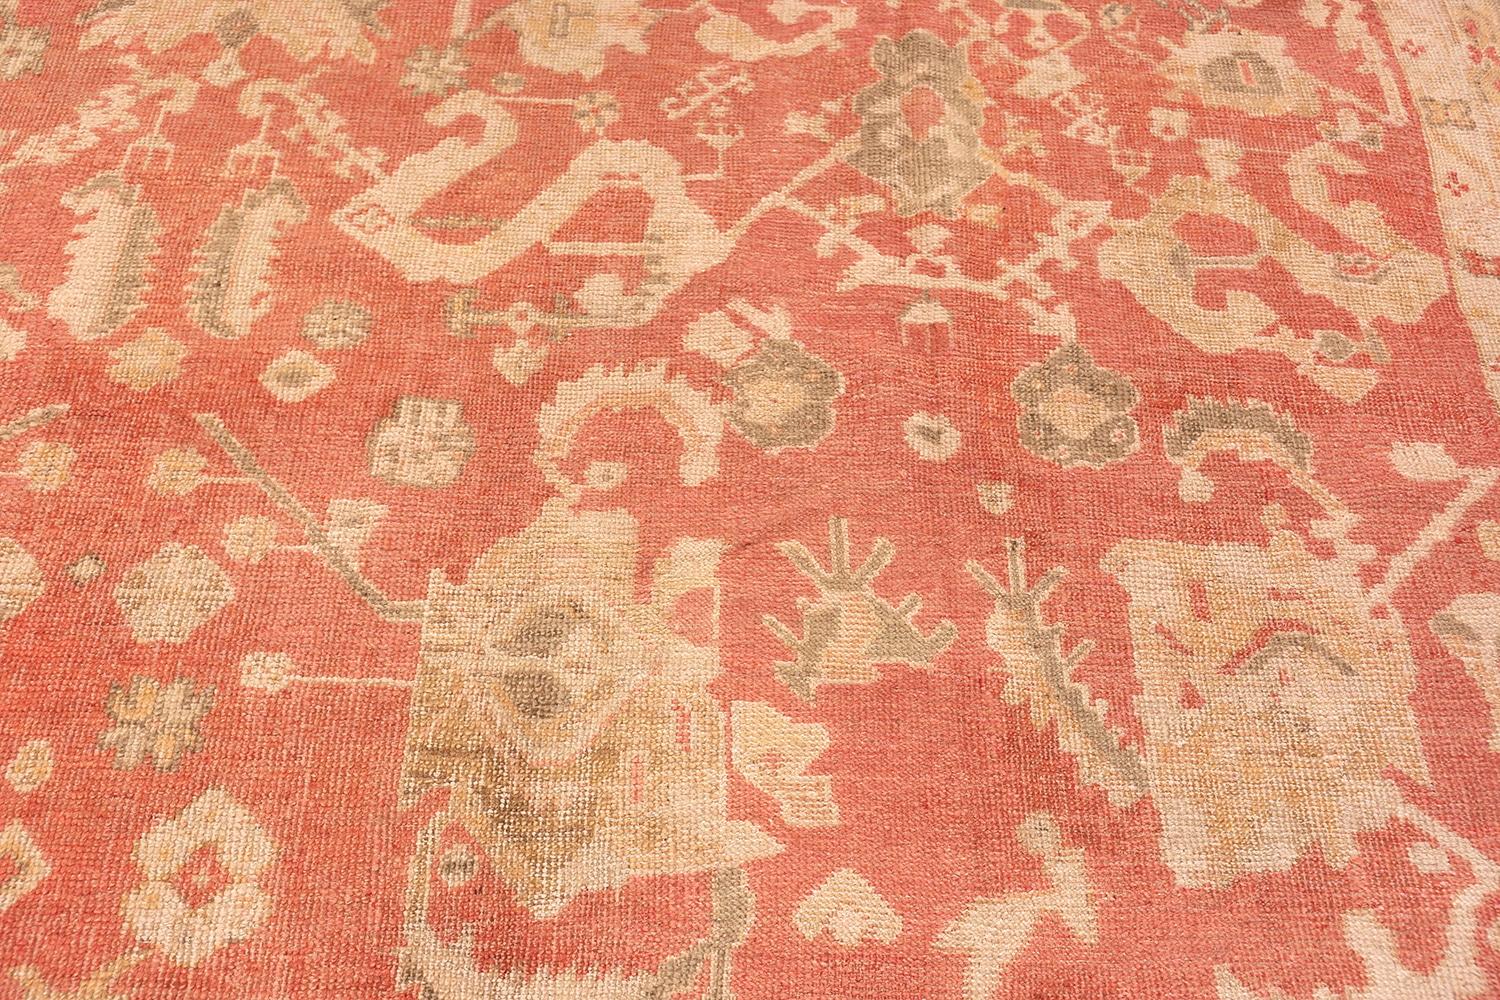 Antique Turkish Oushak Rug. 13 ft. 6 in x 16 ft. 6 in In Good Condition For Sale In New York, NY